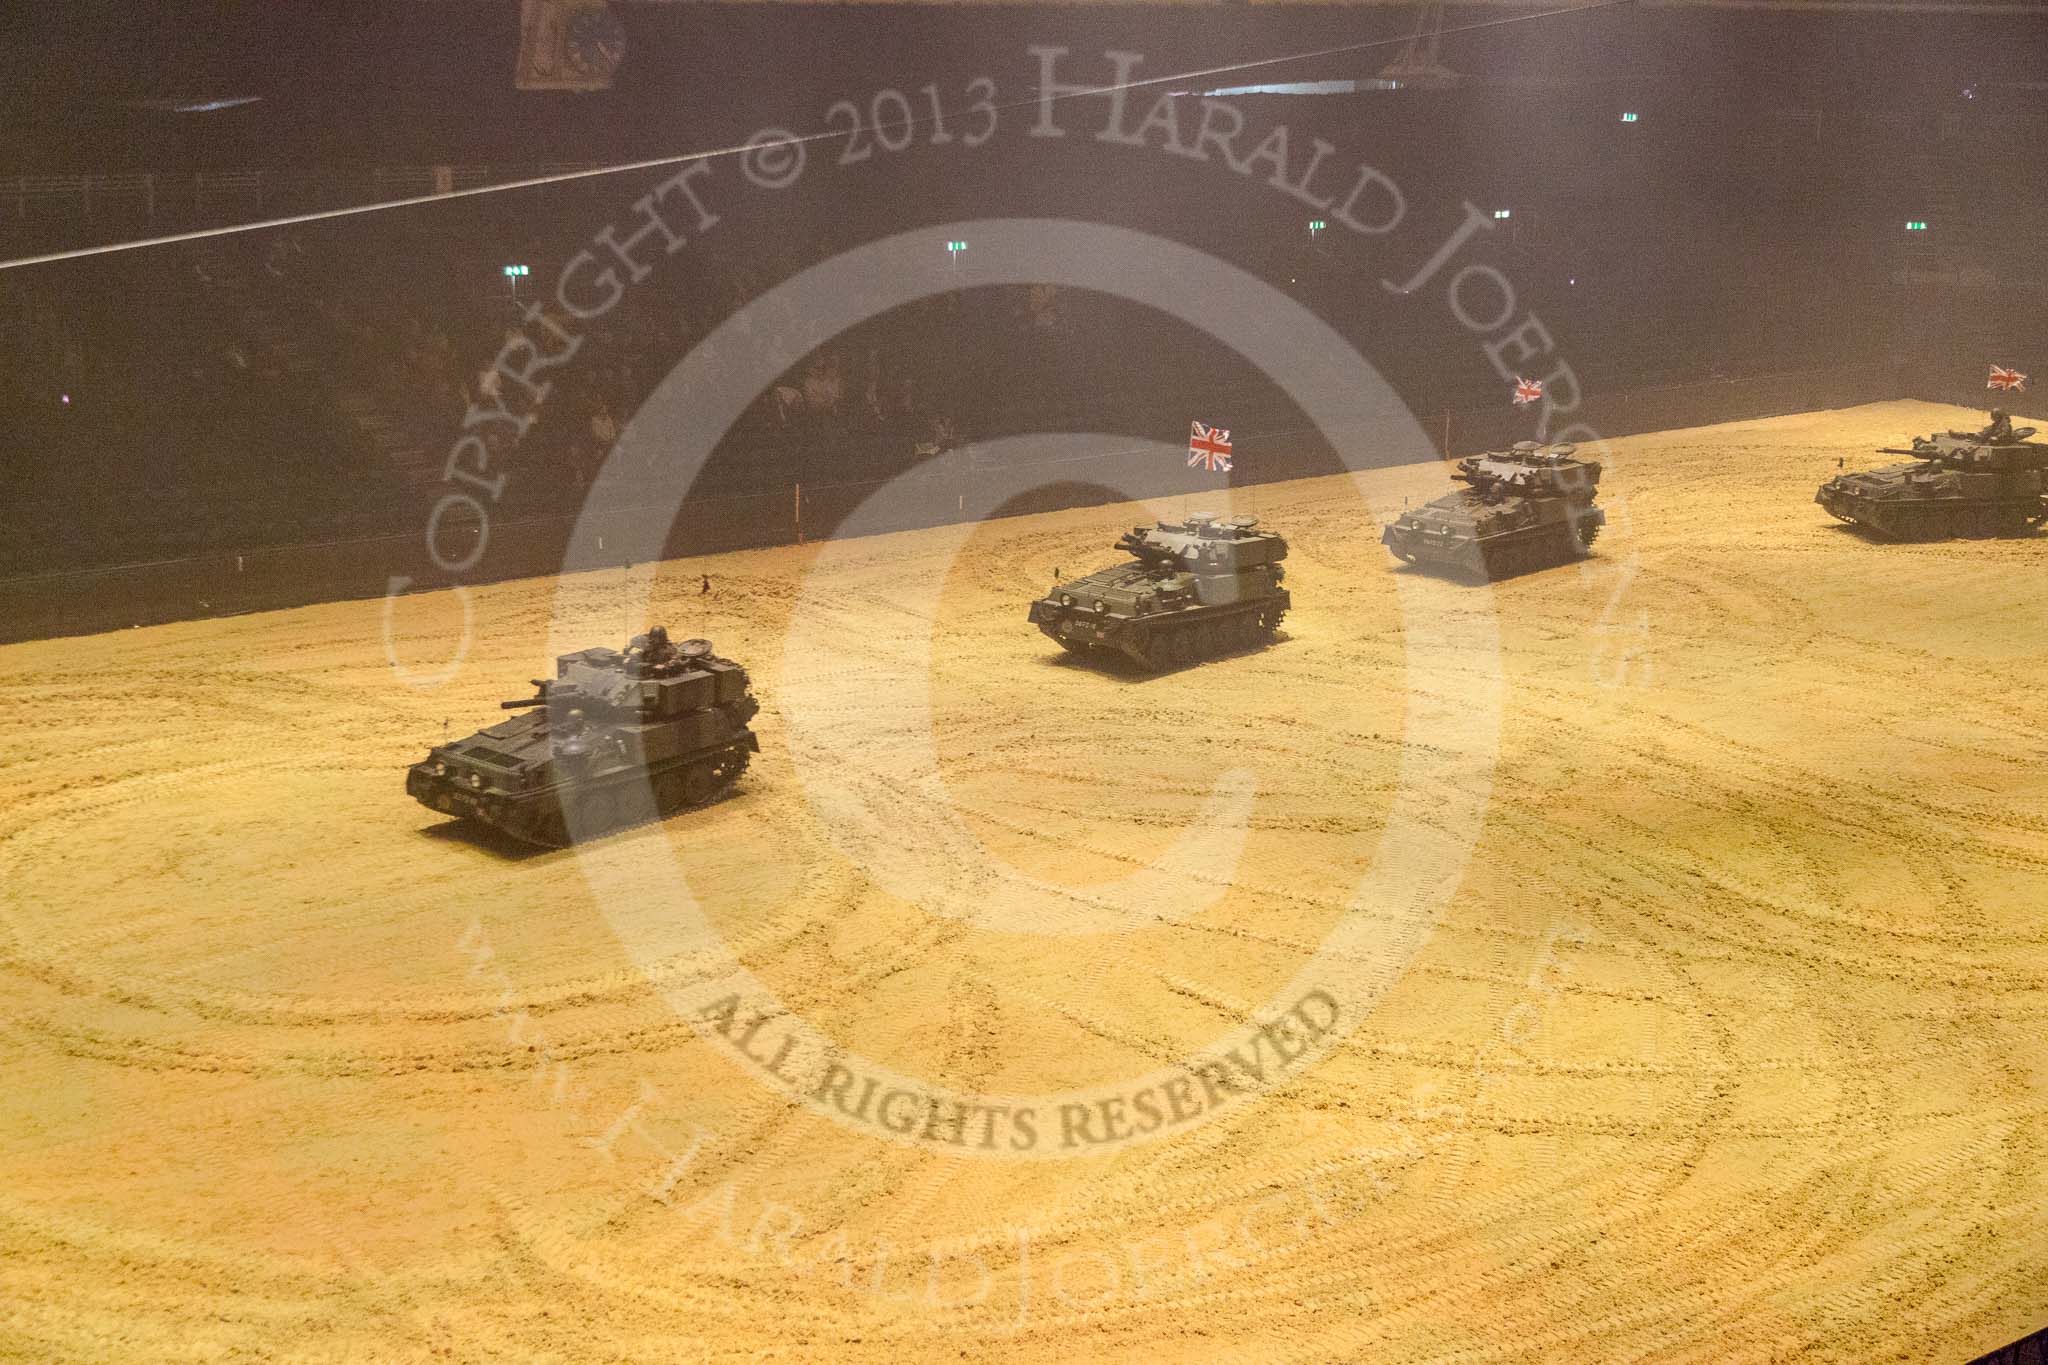 British Military Tournament 2013.
Earls Court,
London SW5,

United Kingdom,
on 06 December 2013 at 16:23, image #405